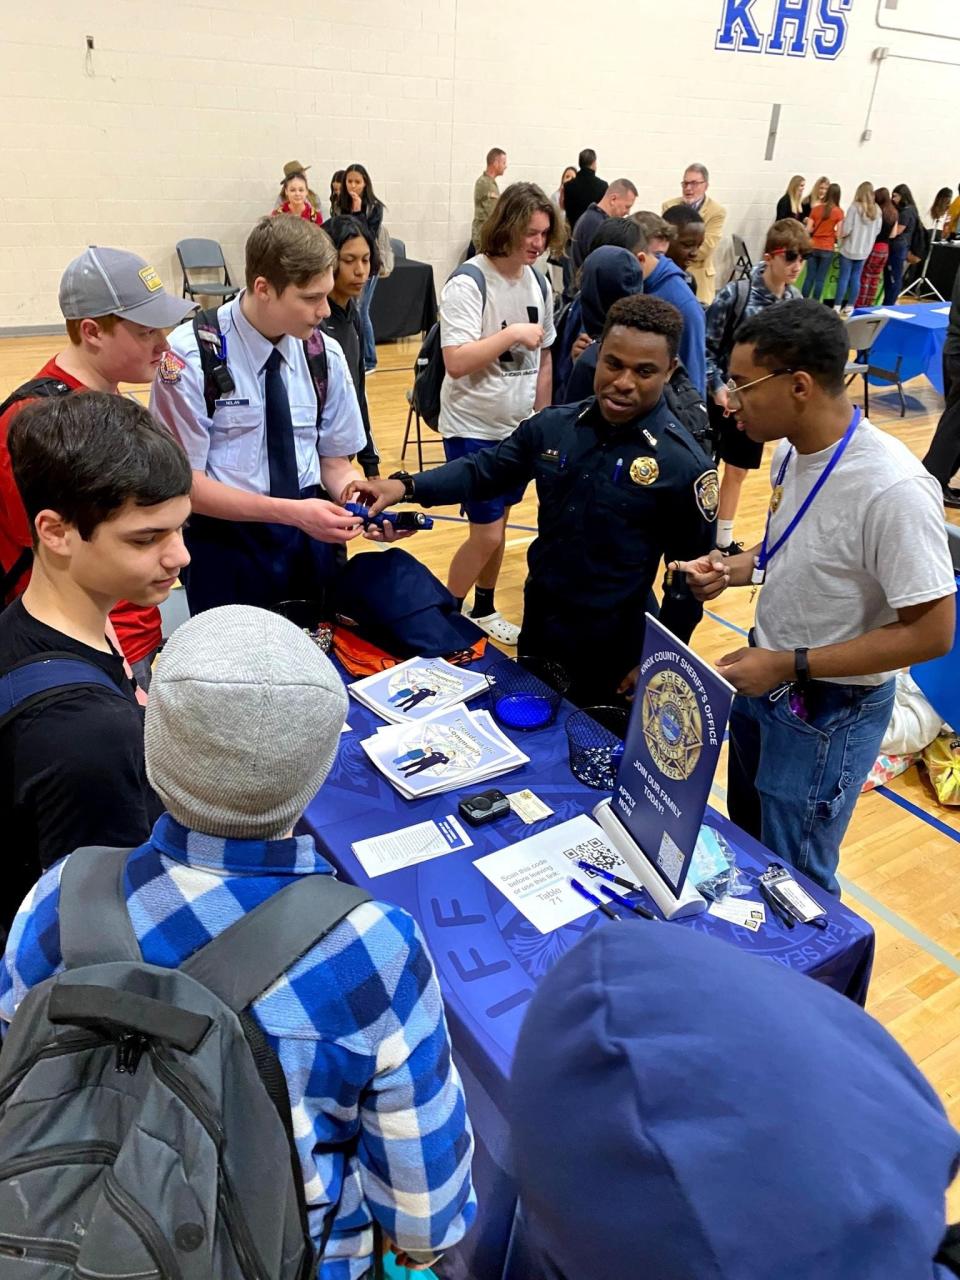 Army National Guard Specialist, KCSO Corrections officer and Karns High alum Leo Piety tells students Kyle Lefevre, Jackson Gerdes, Preston Nolan and Adrien Foster about the world of law enforcement at a Career Pathways Fair Jan. 26 at Karns High School.